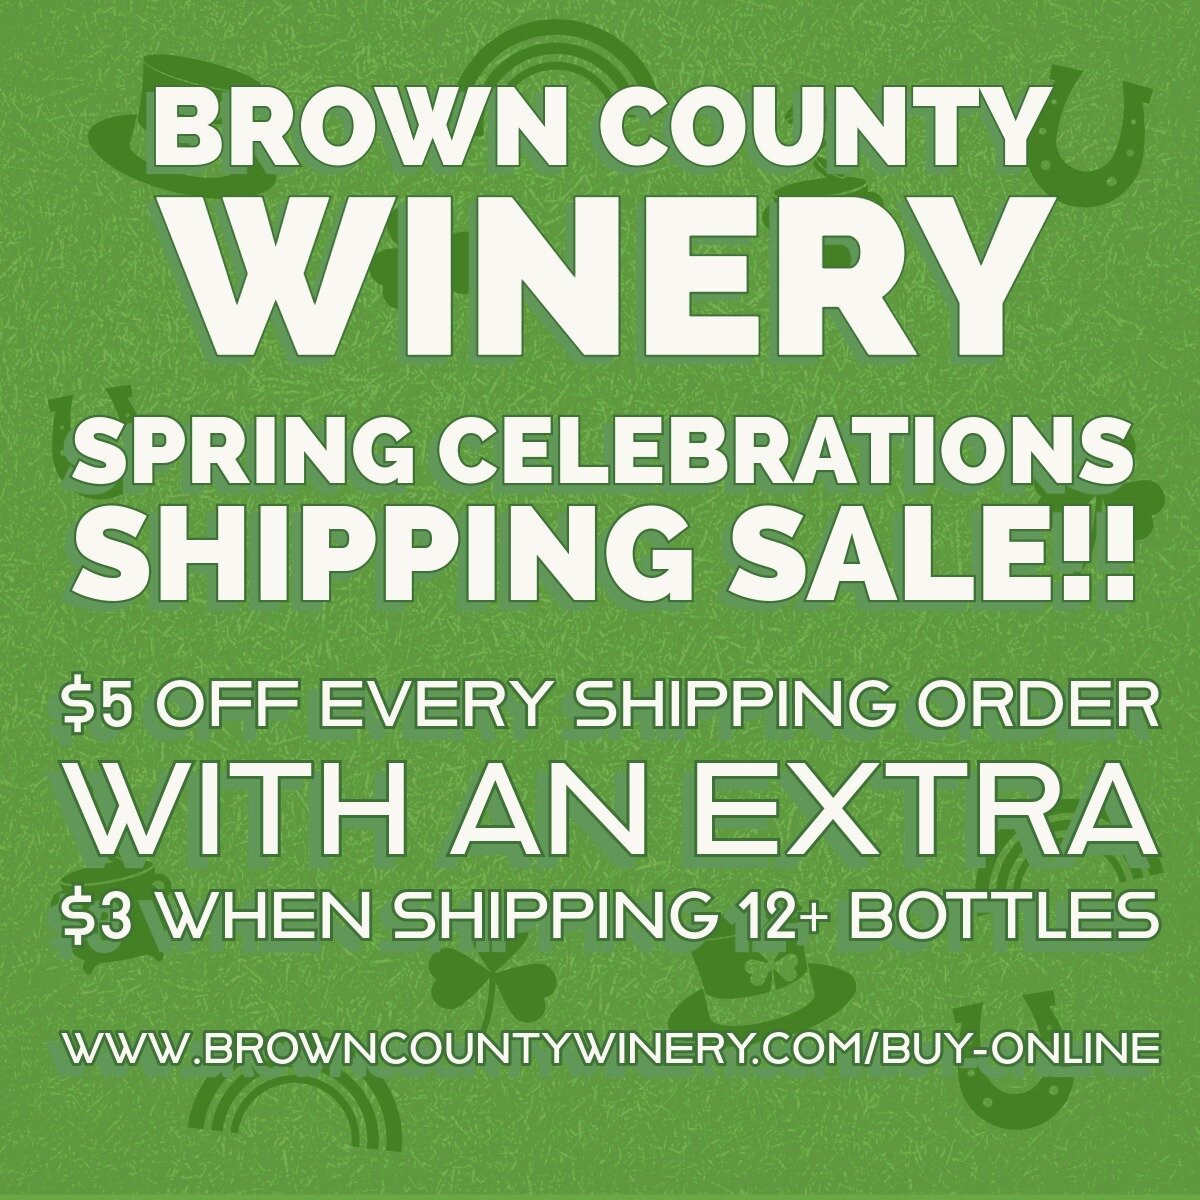 Sale ends on the Spring Equinox!! Order at www.browncountywinery.com/buy-online or call the winery at 812.988.6144. #ILoveBrownCounty #ExploreIndianaWines